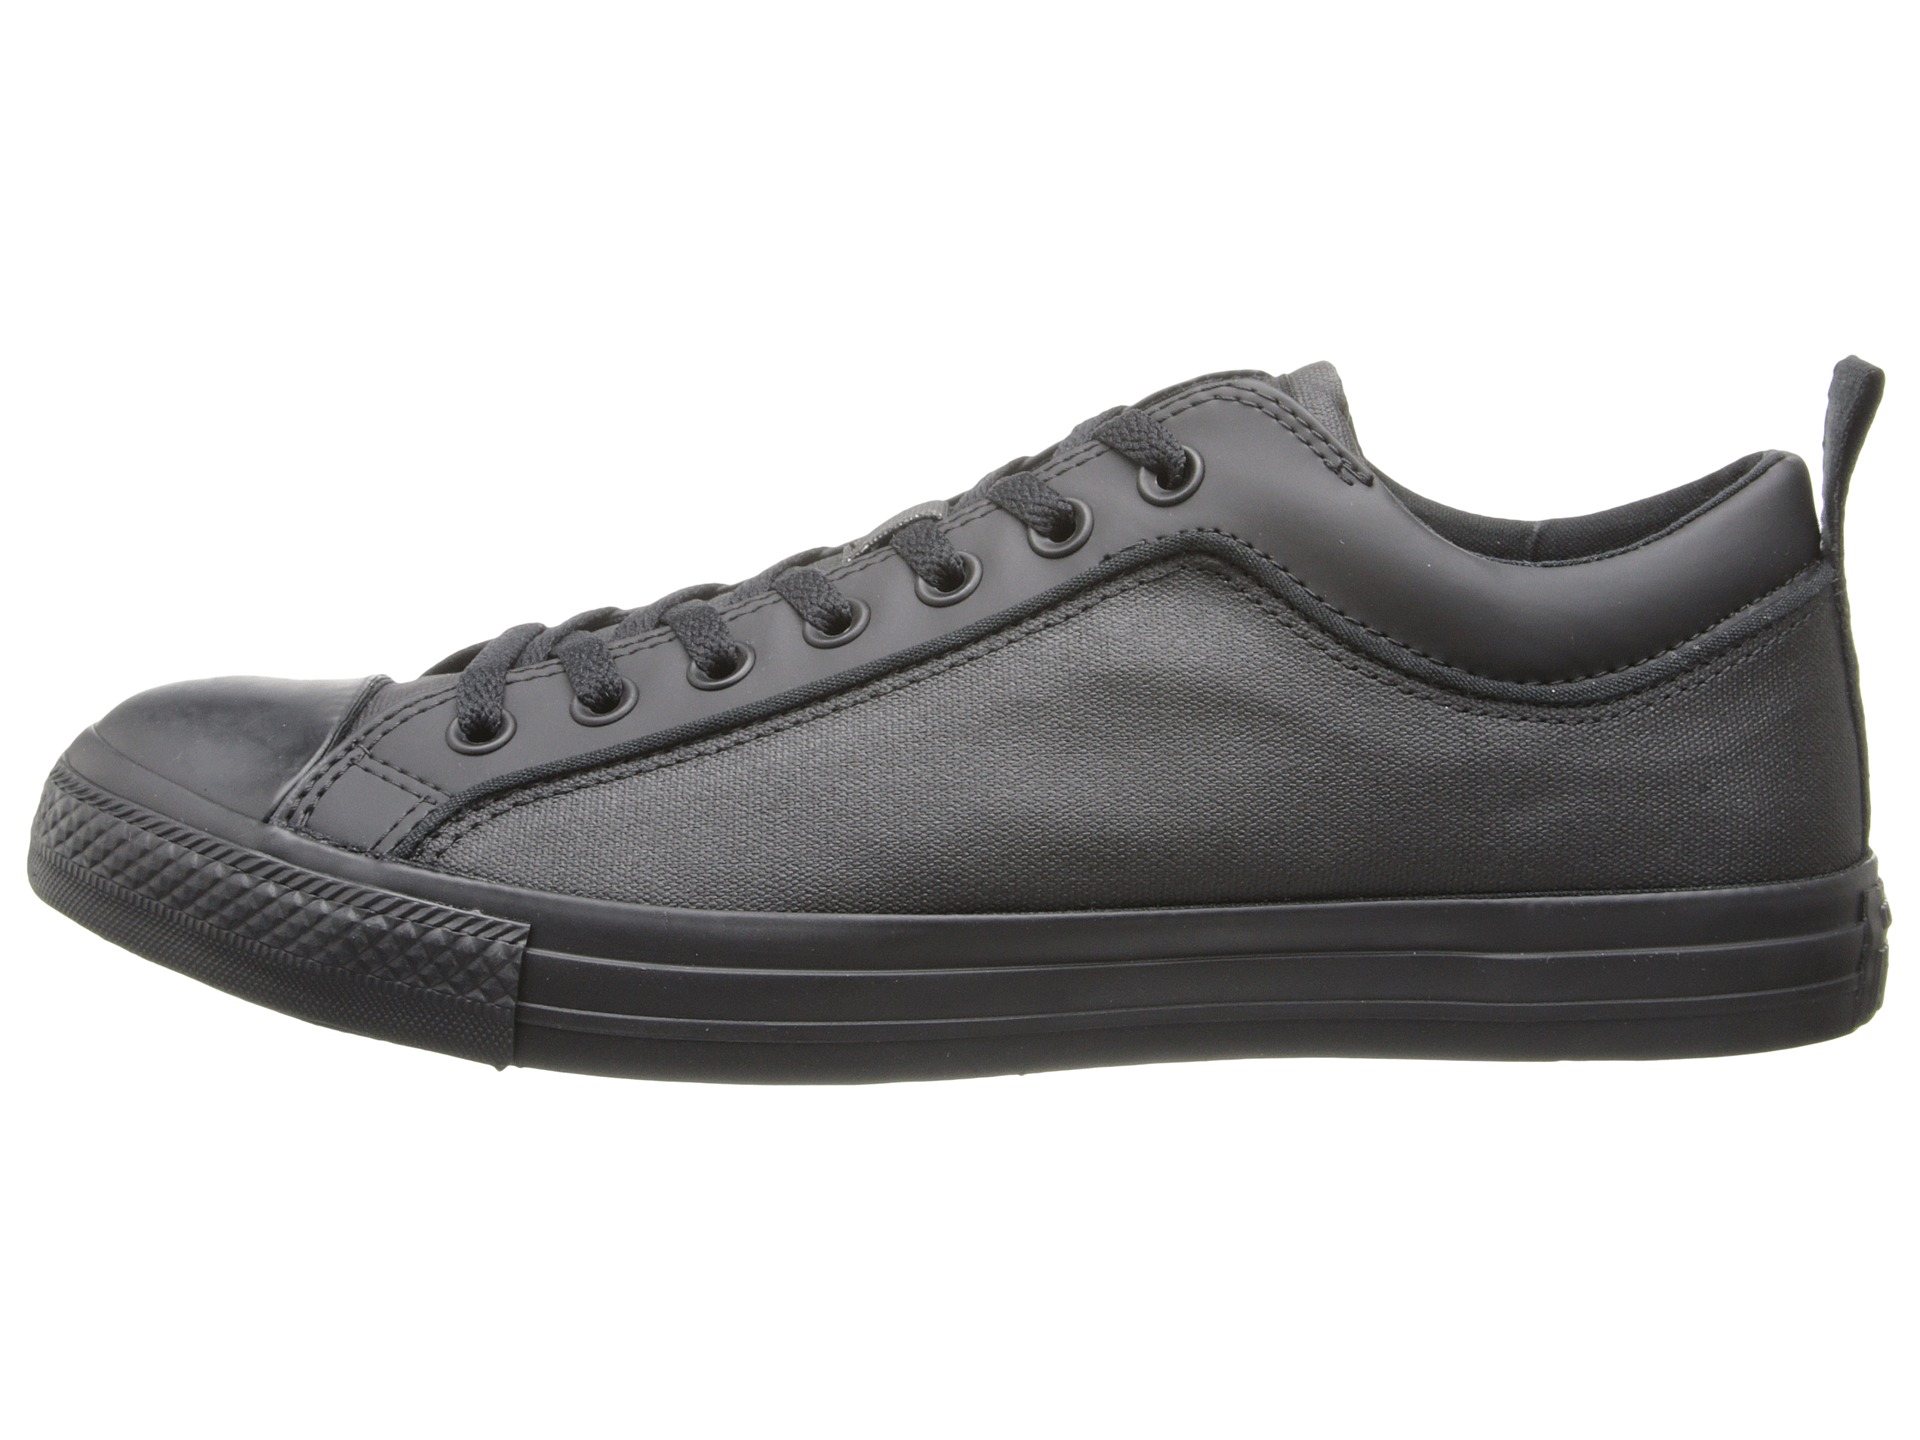 Converse Chuck Taylor All Star Matte Torque Ox Black | Shipped Free at ...